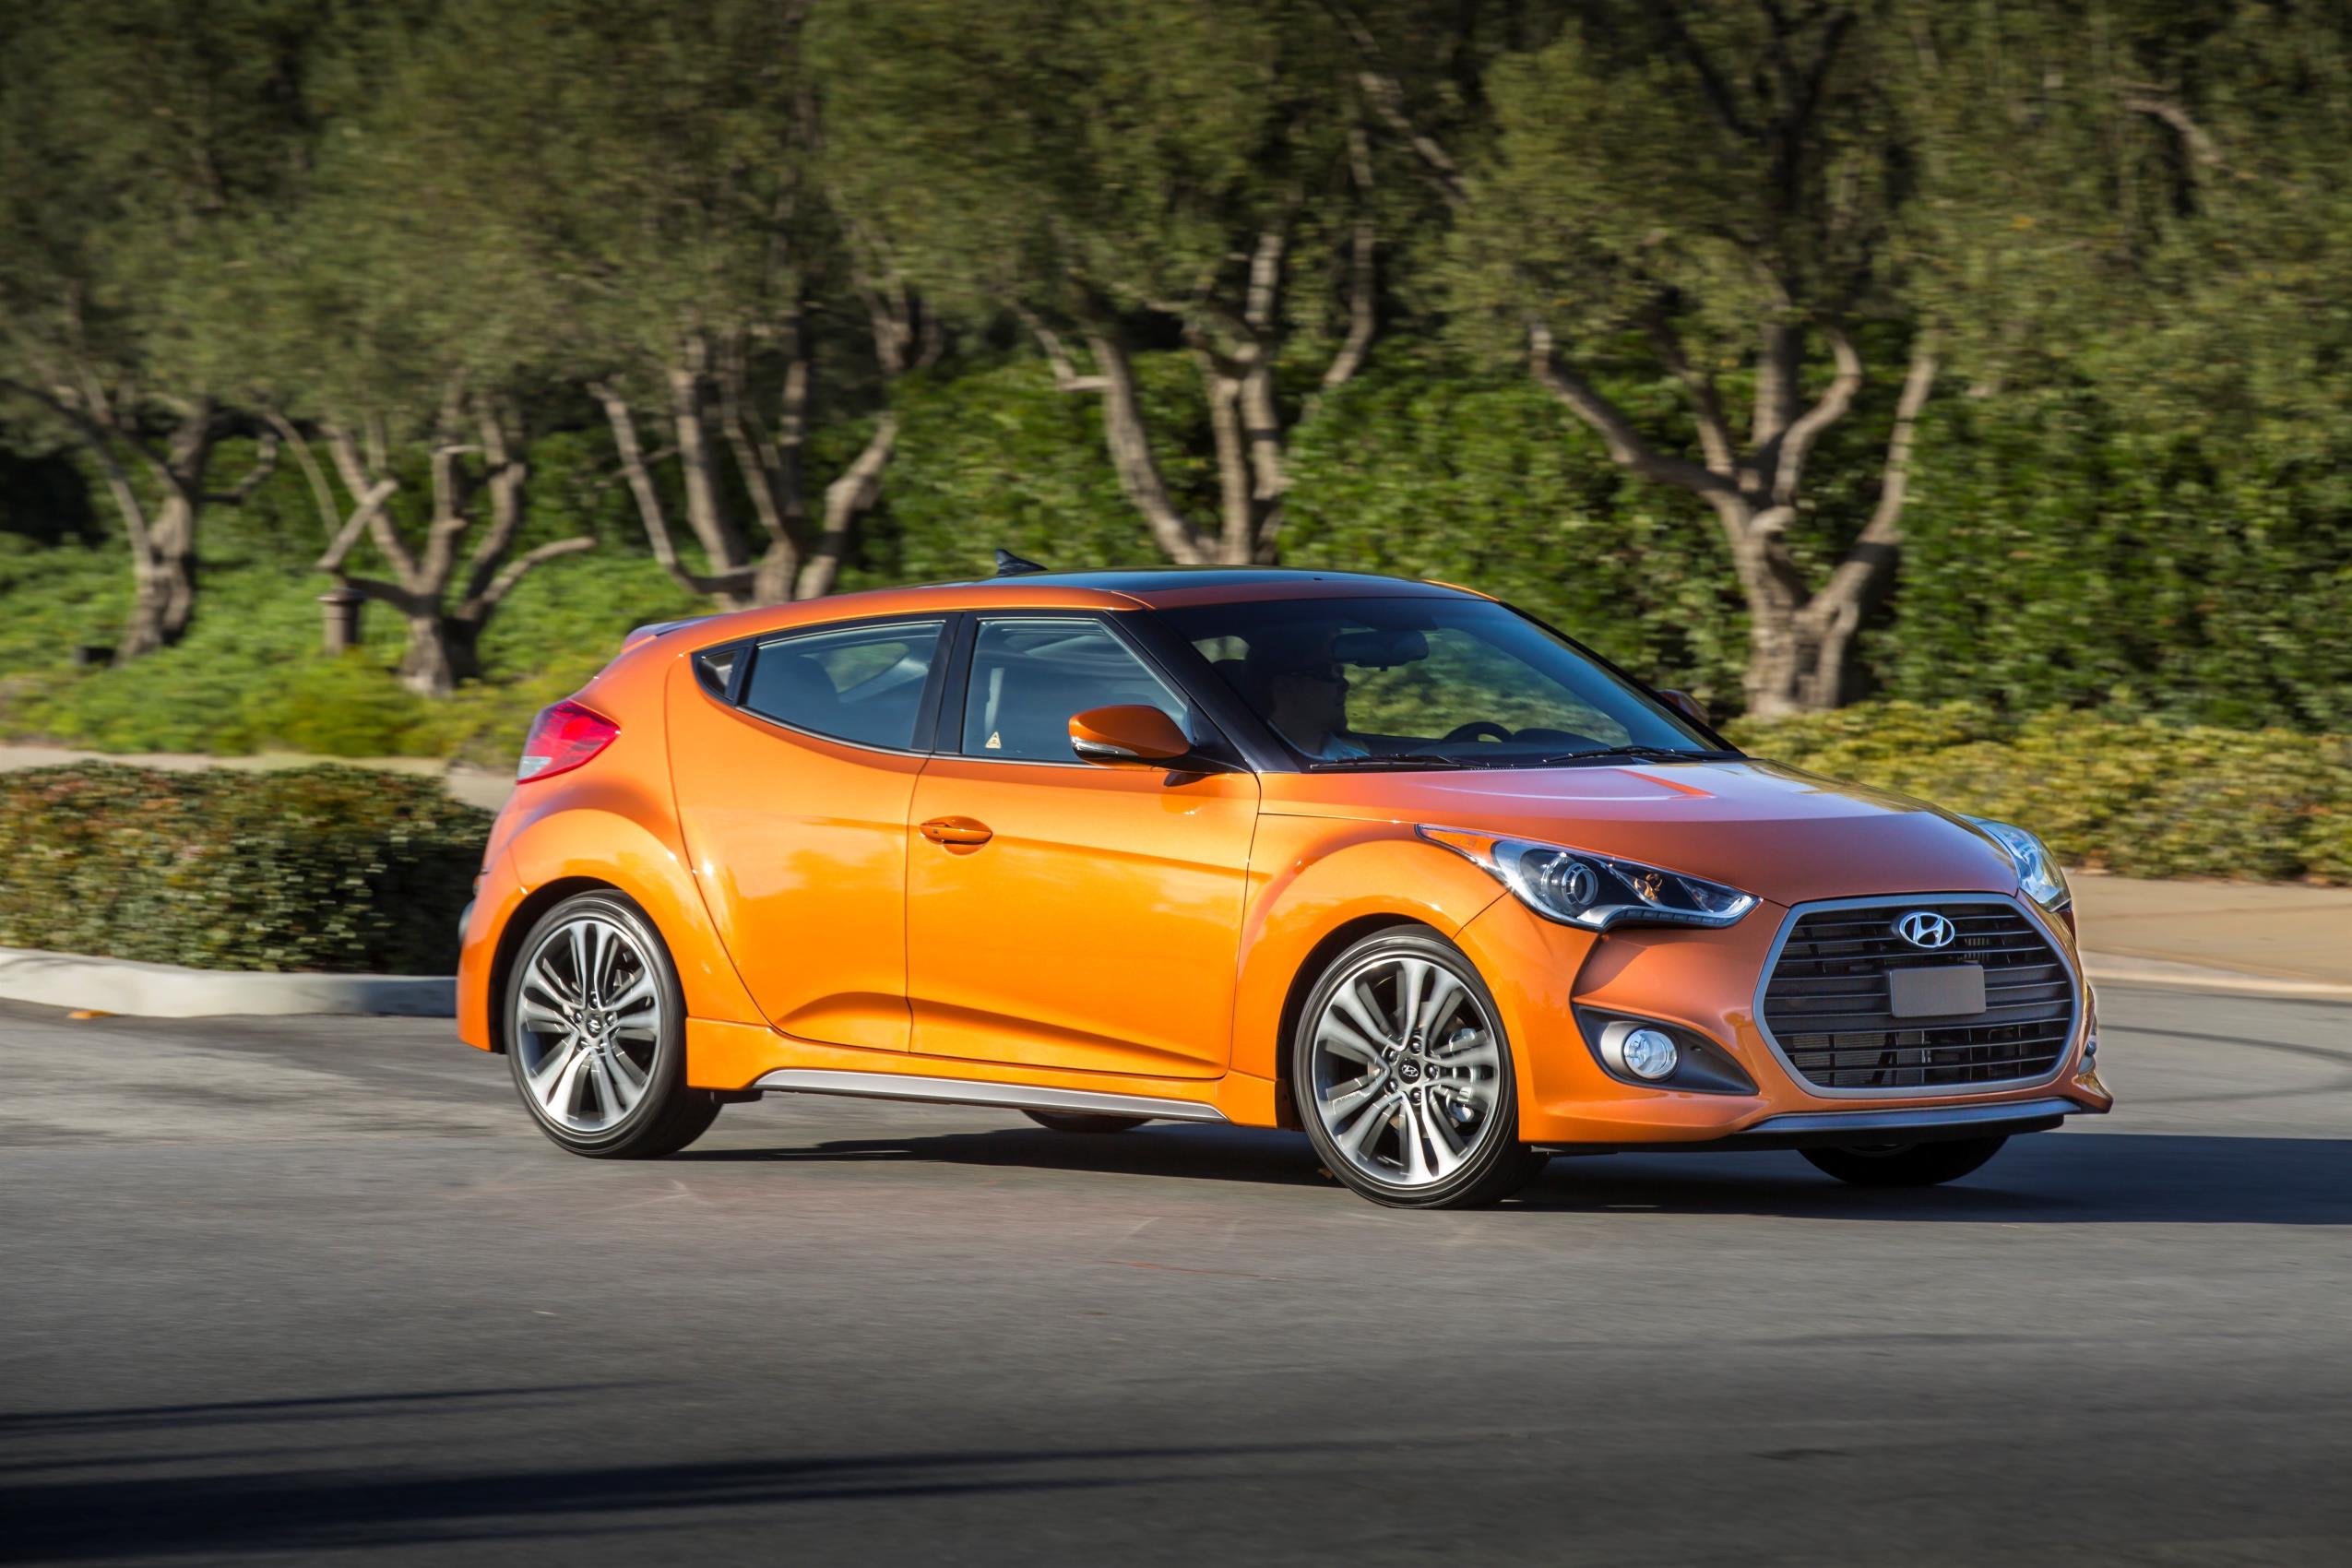 Hyundai Adds ValueMinded Trim Level To the Veloster autoevolution